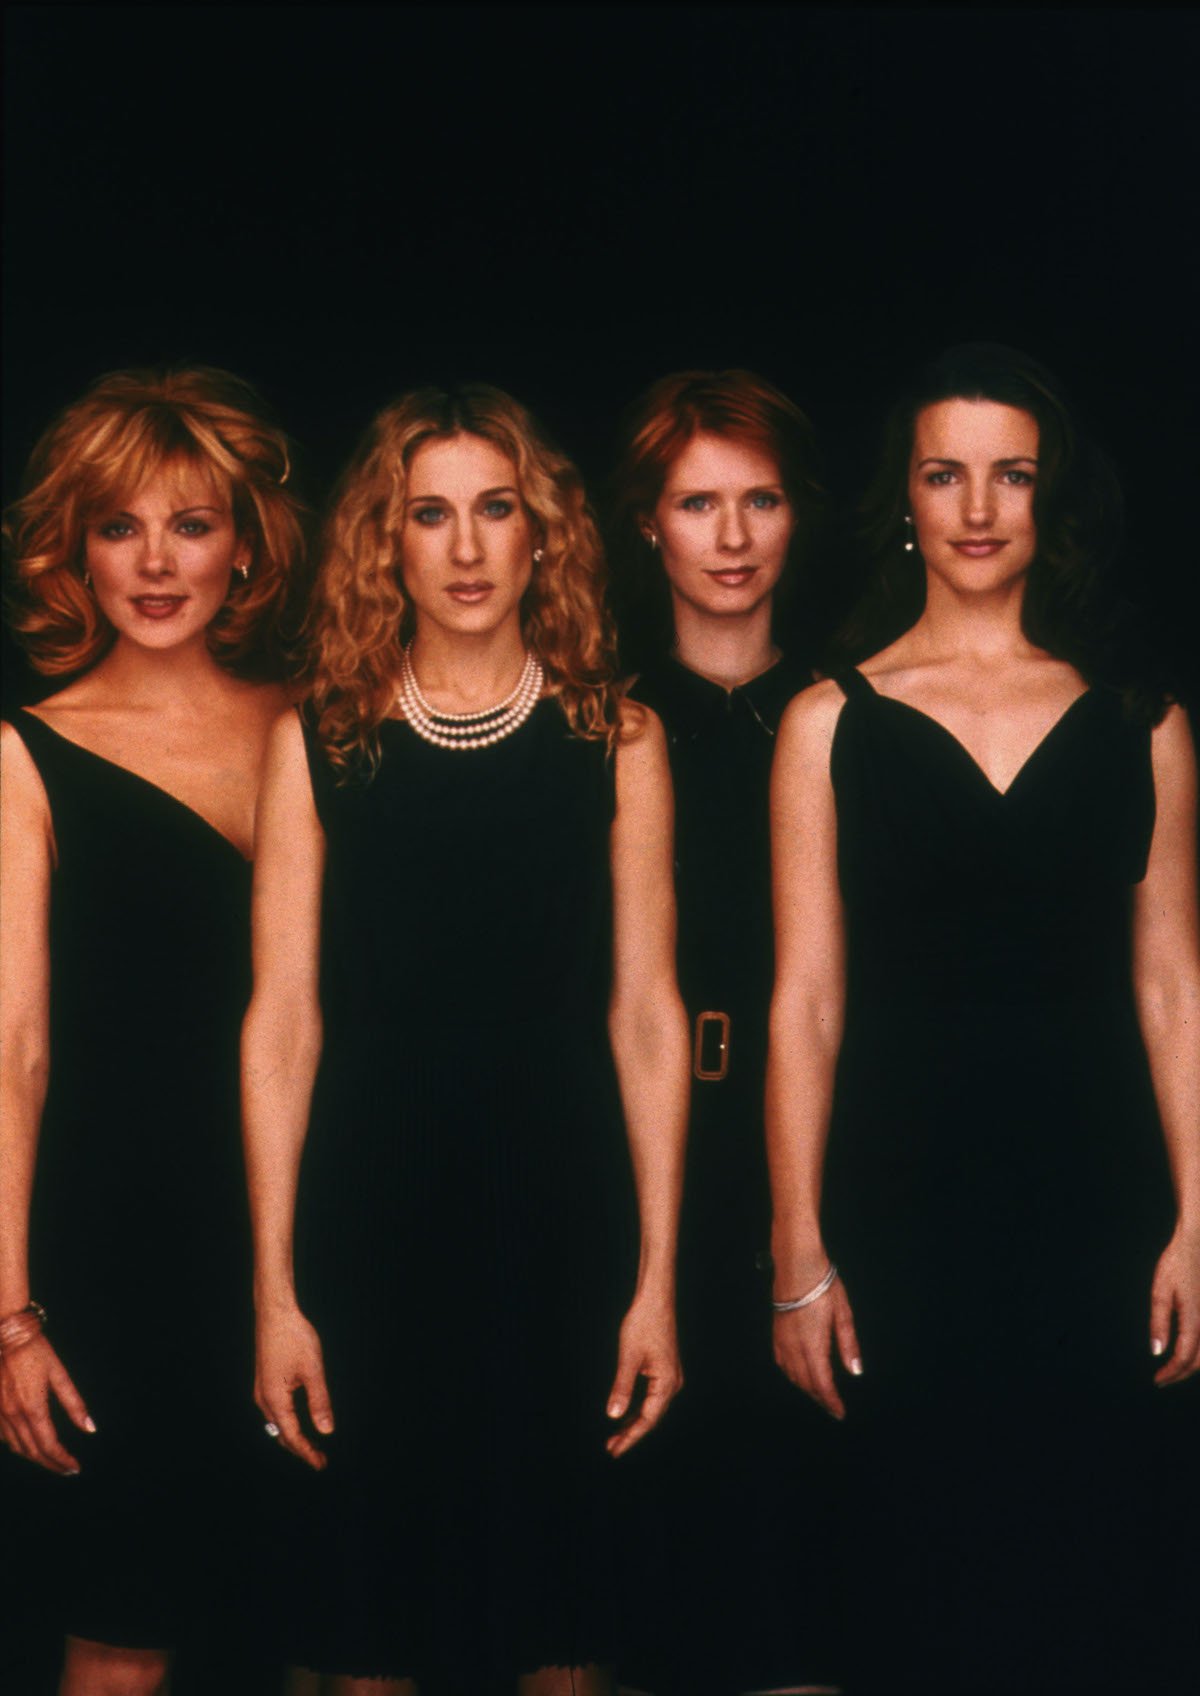 Kim Cattrall, Sarah Jessica Parker, Cynthia Nixon, and Kristin Davis pose for a portrait in an undated photo on the set of the HBO series 'Sex and the City'